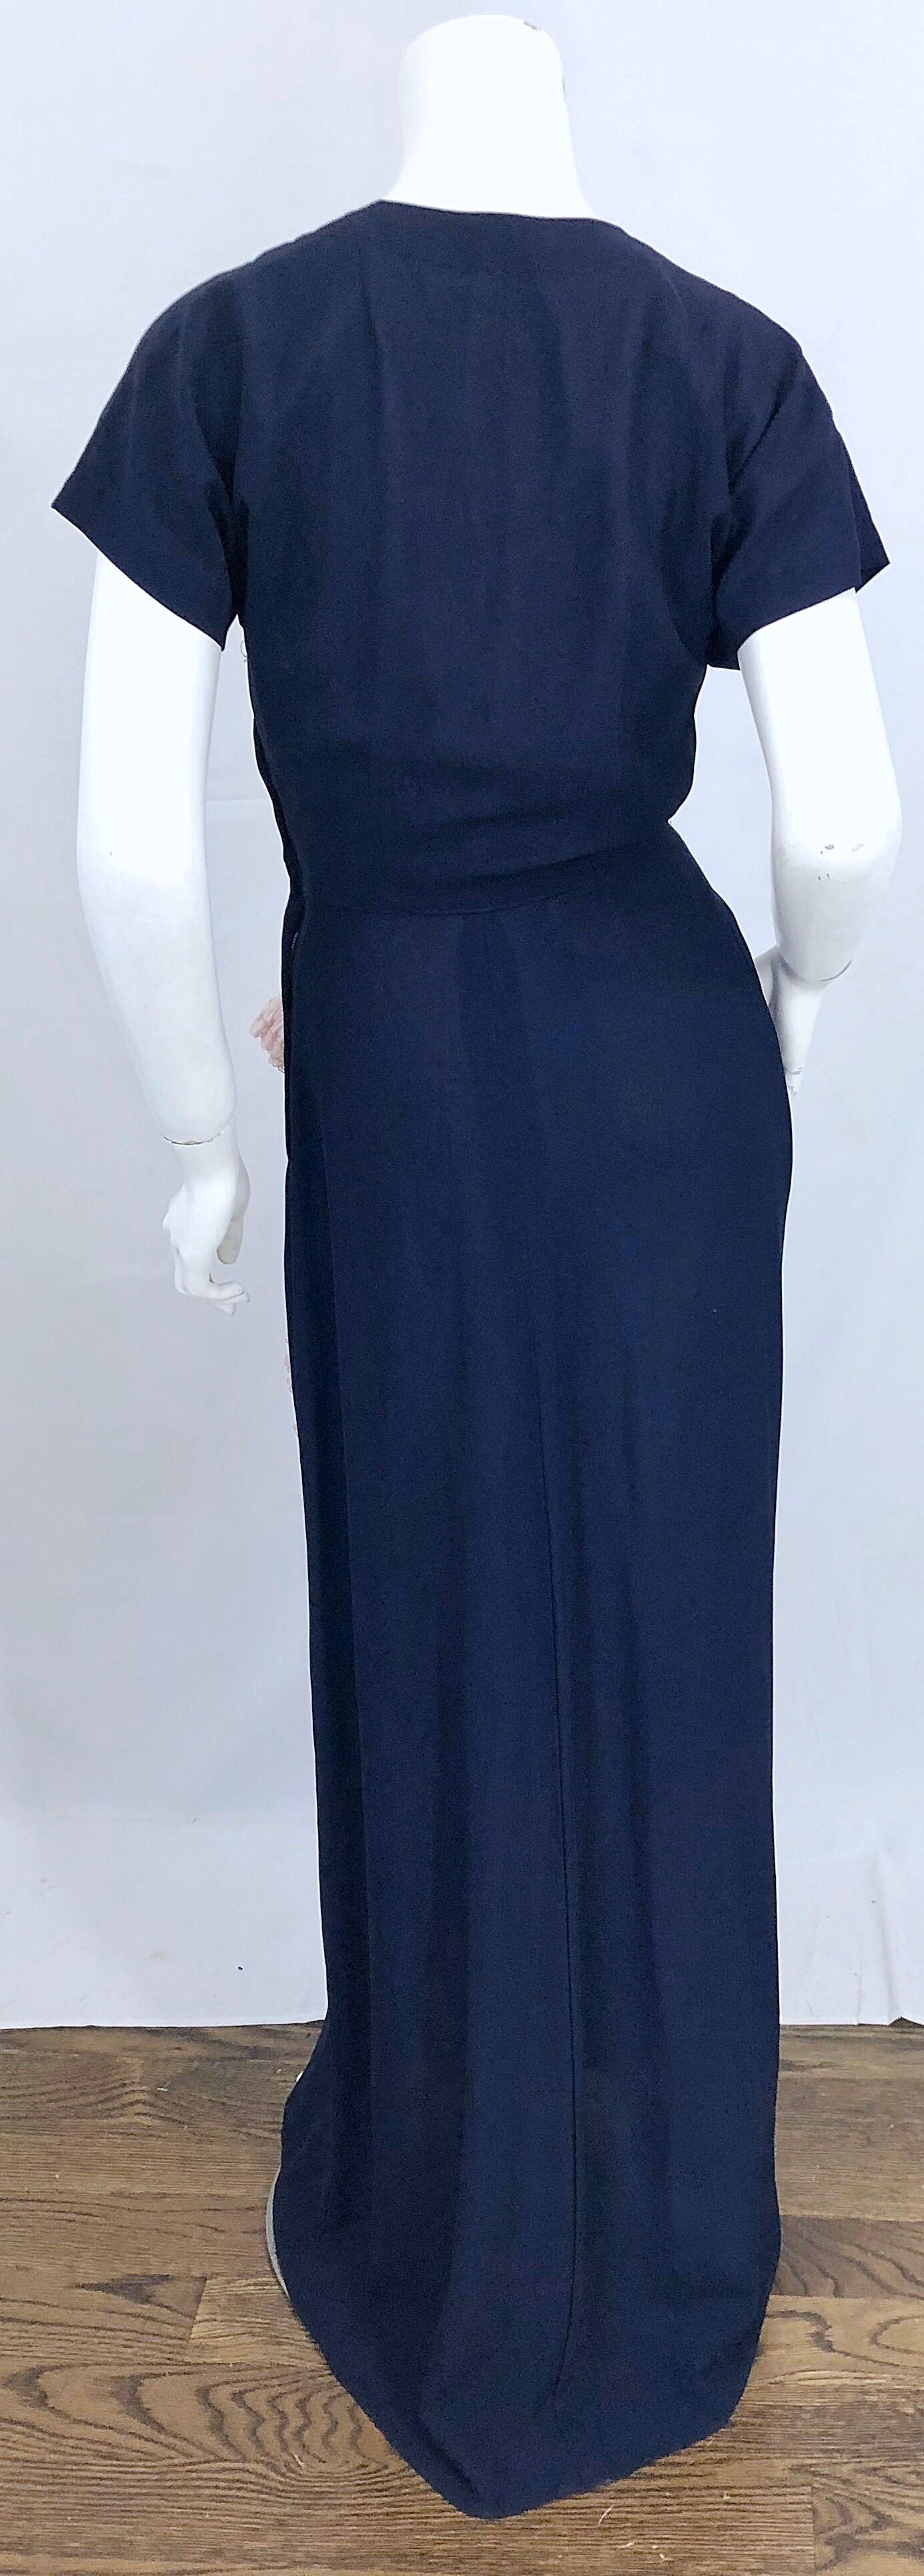 1940s Demi Couture Navy Blue + Pale Pink Short Sleeve 40s Vintage Gown / Dress For Sale 5